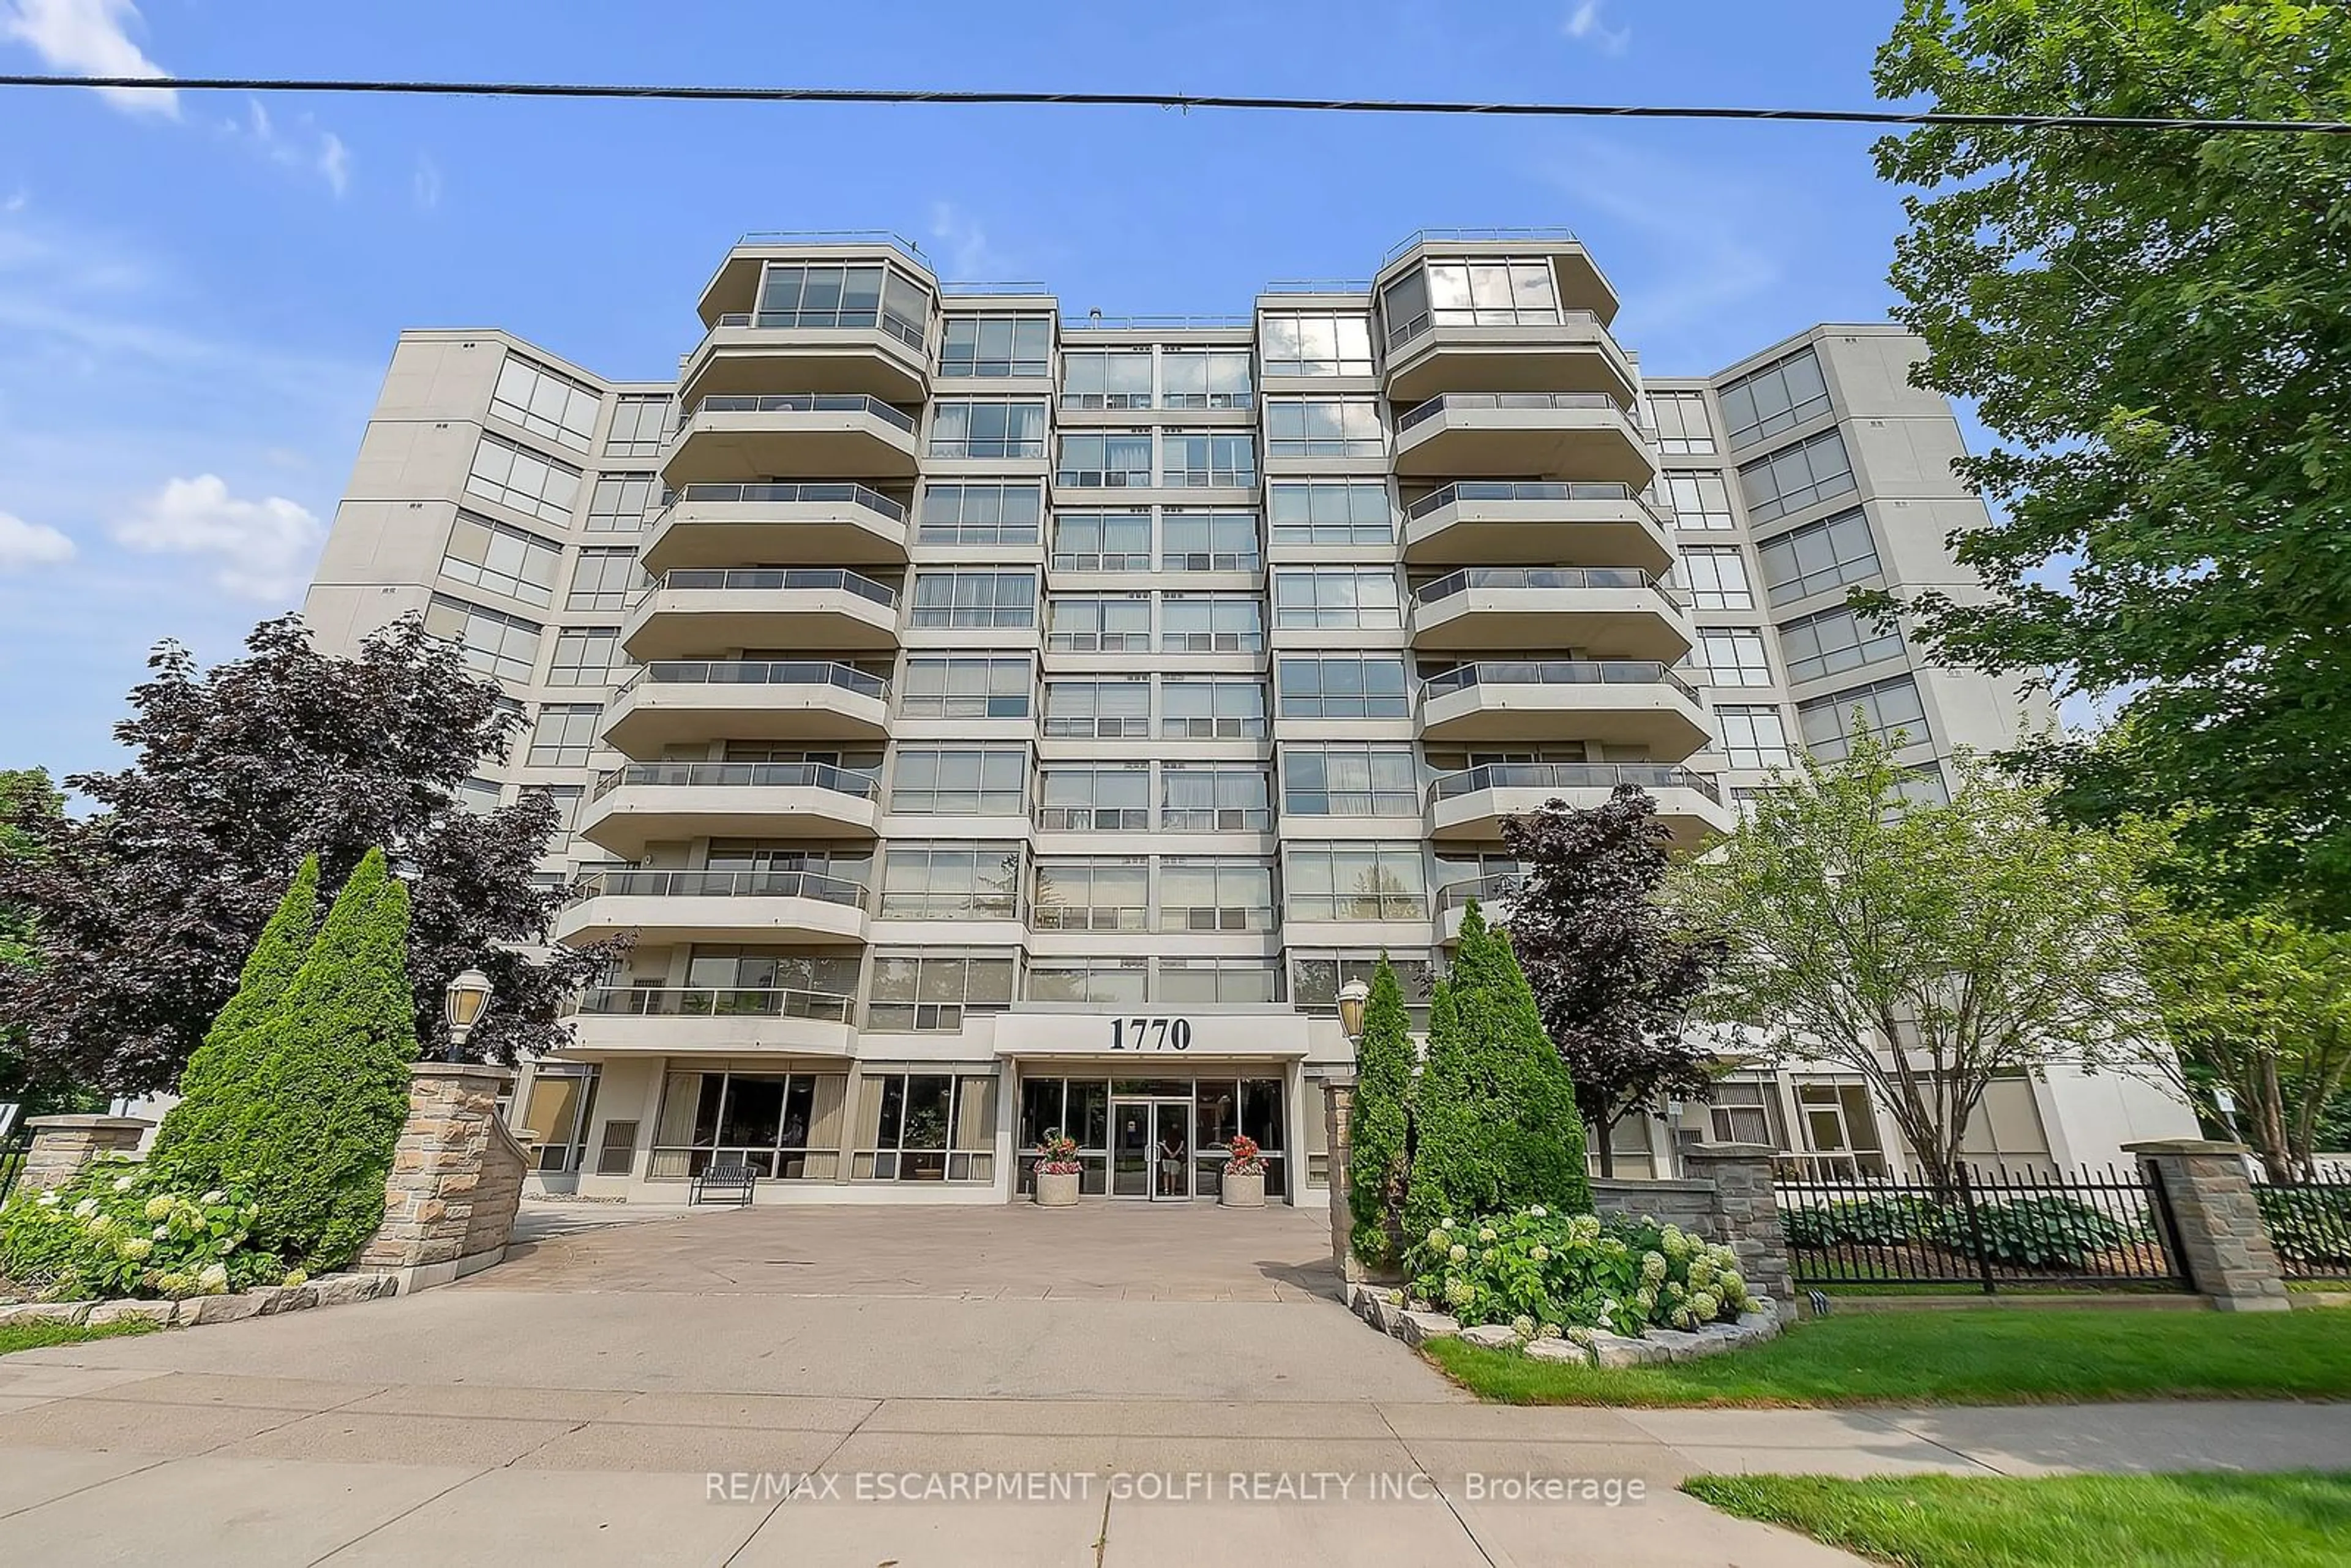 A pic from exterior of the house or condo for 1770 Main St #603, Hamilton Ontario L8S 1H1